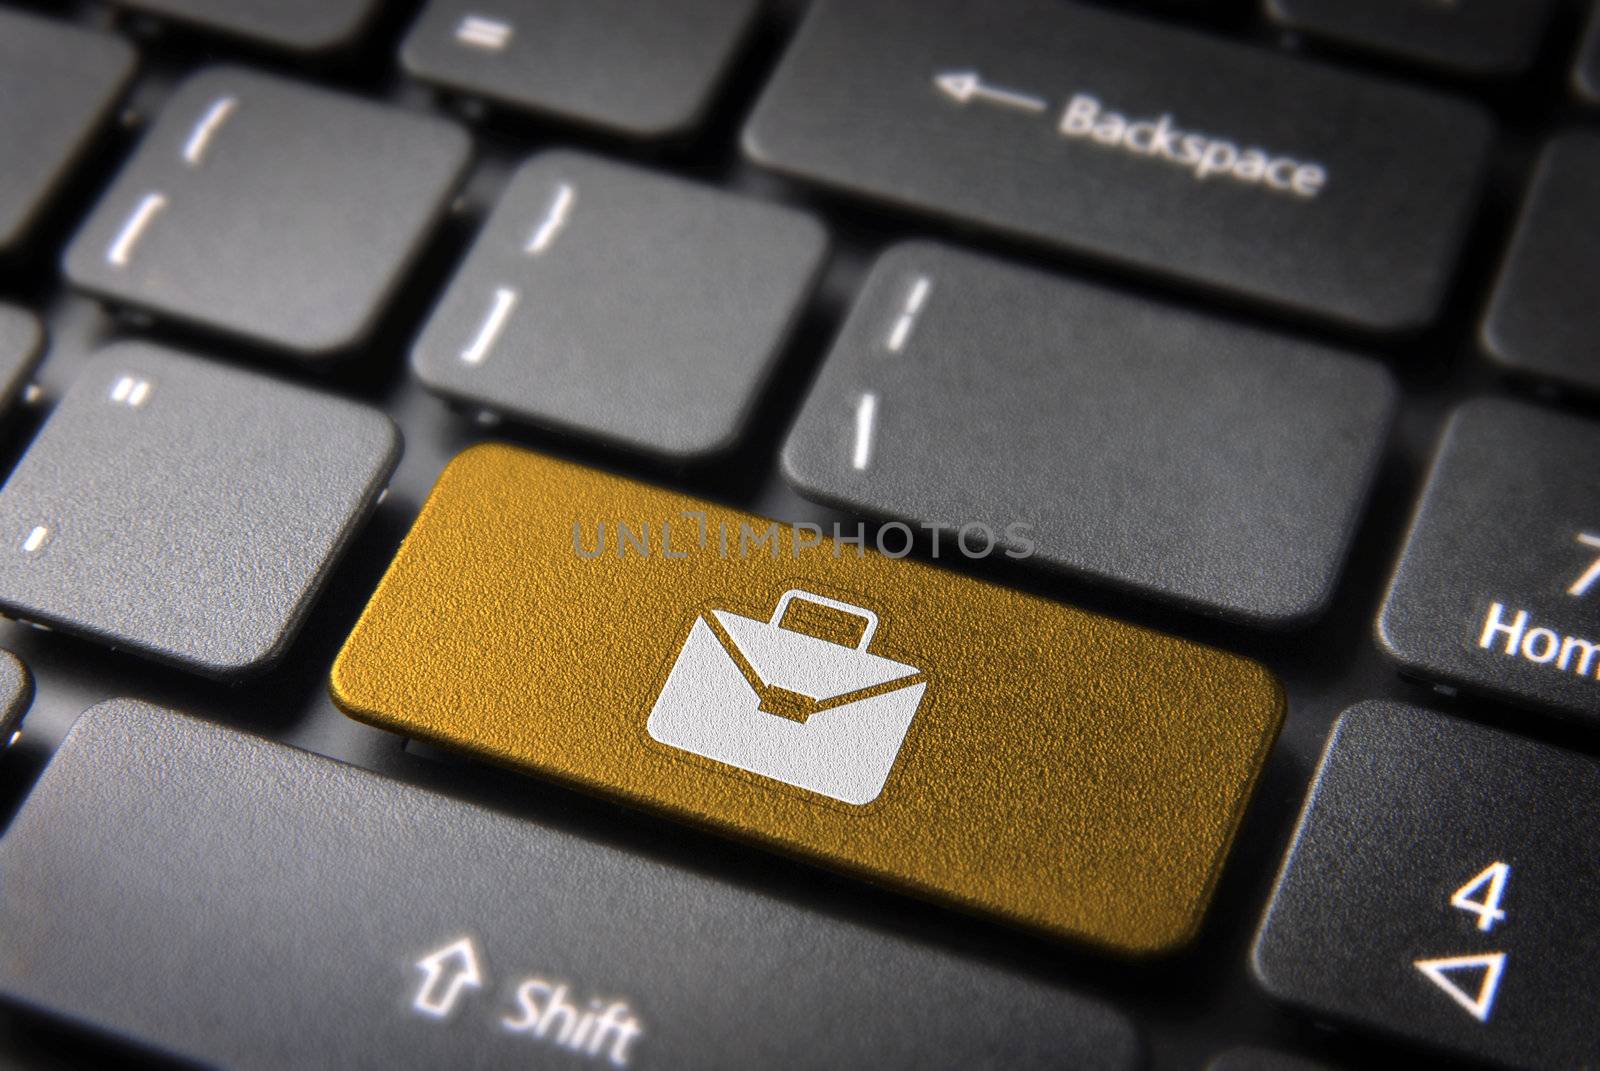 Professional business online key with portfolio icon on laptop keyboard. Included clipping path, so you can easily edit it.